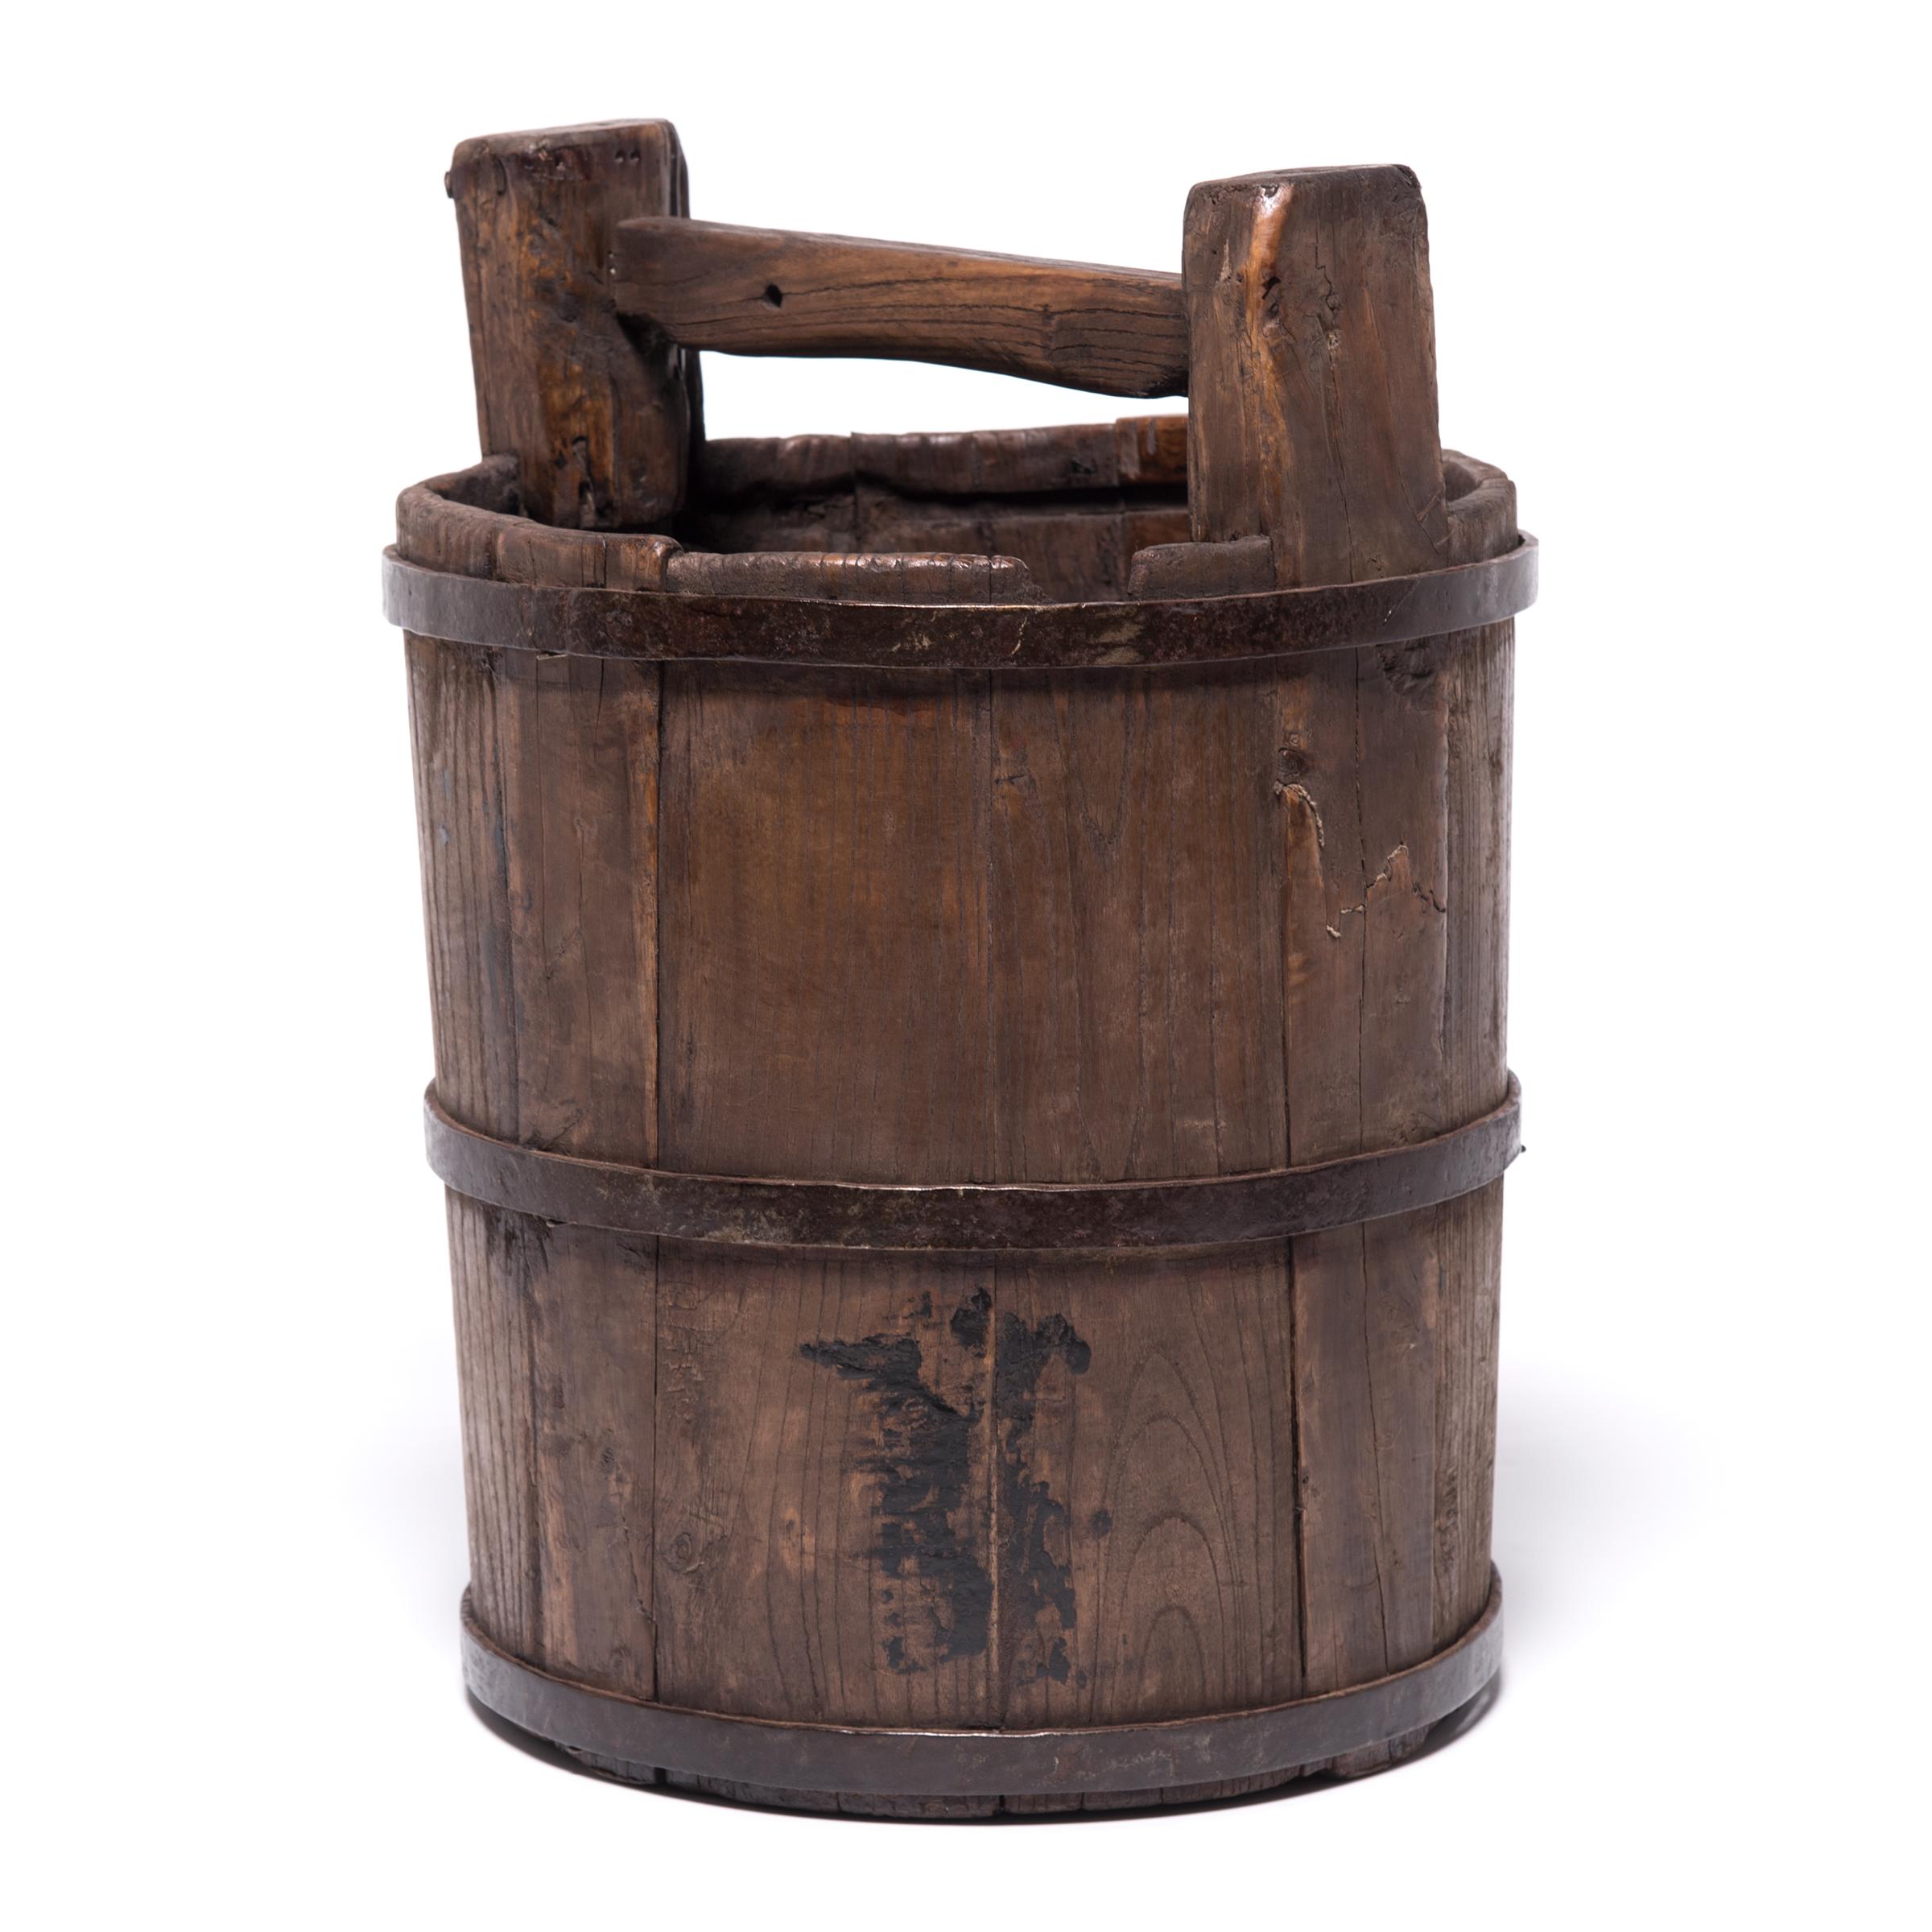 Qing Early 20th Century Chinese Well Bucket